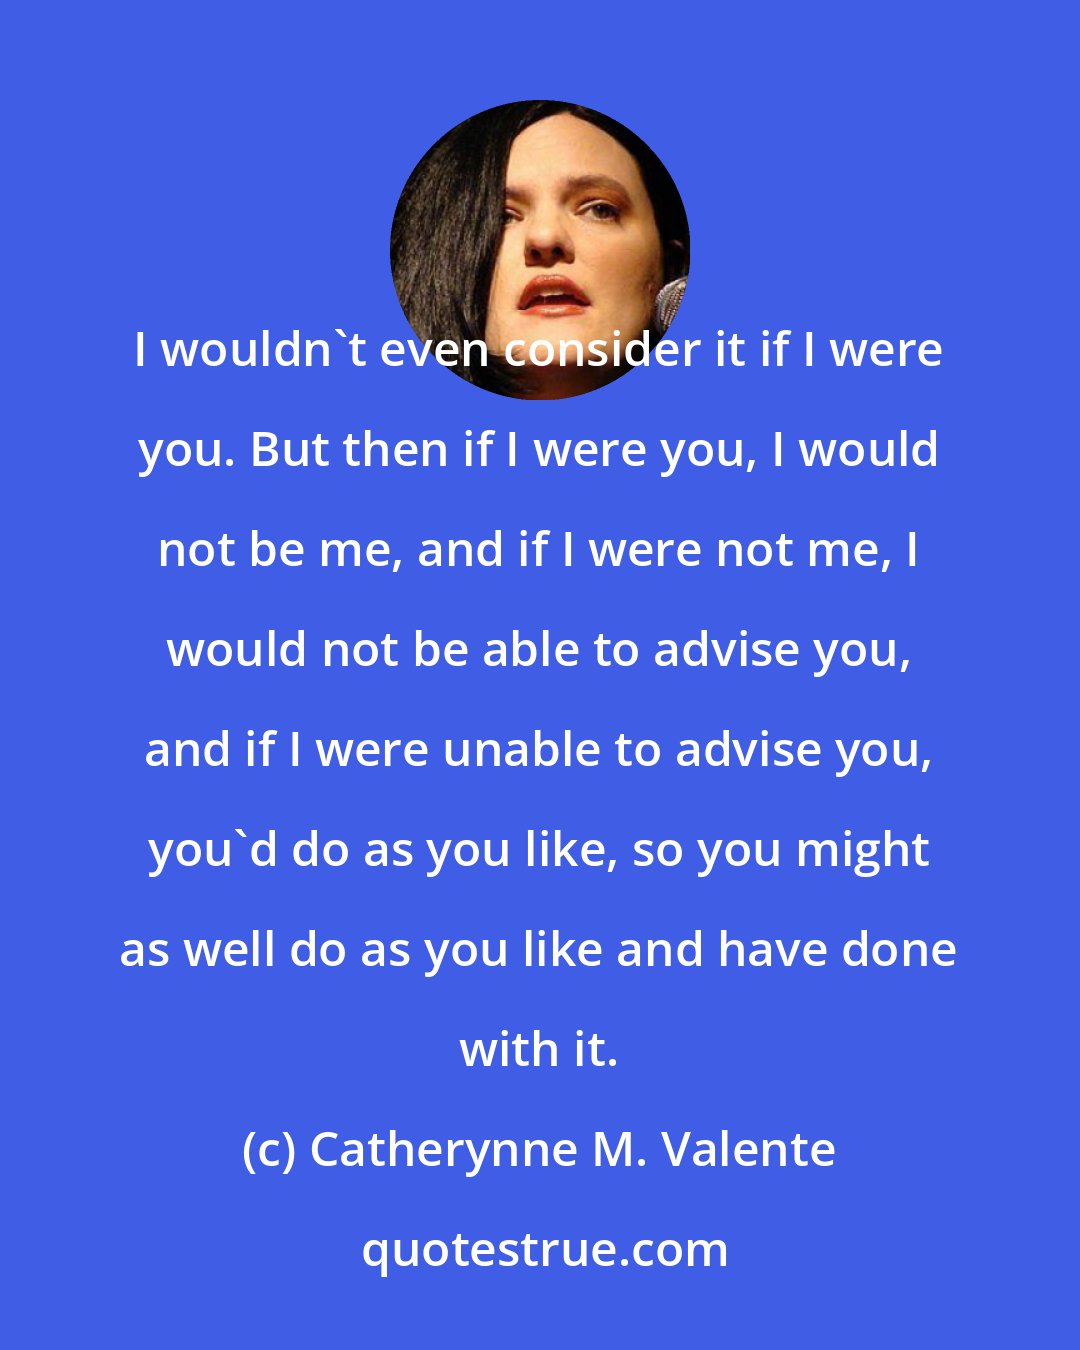 Catherynne M. Valente: I wouldn't even consider it if I were you. But then if I were you, I would not be me, and if I were not me, I would not be able to advise you, and if I were unable to advise you, you'd do as you like, so you might as well do as you like and have done with it.